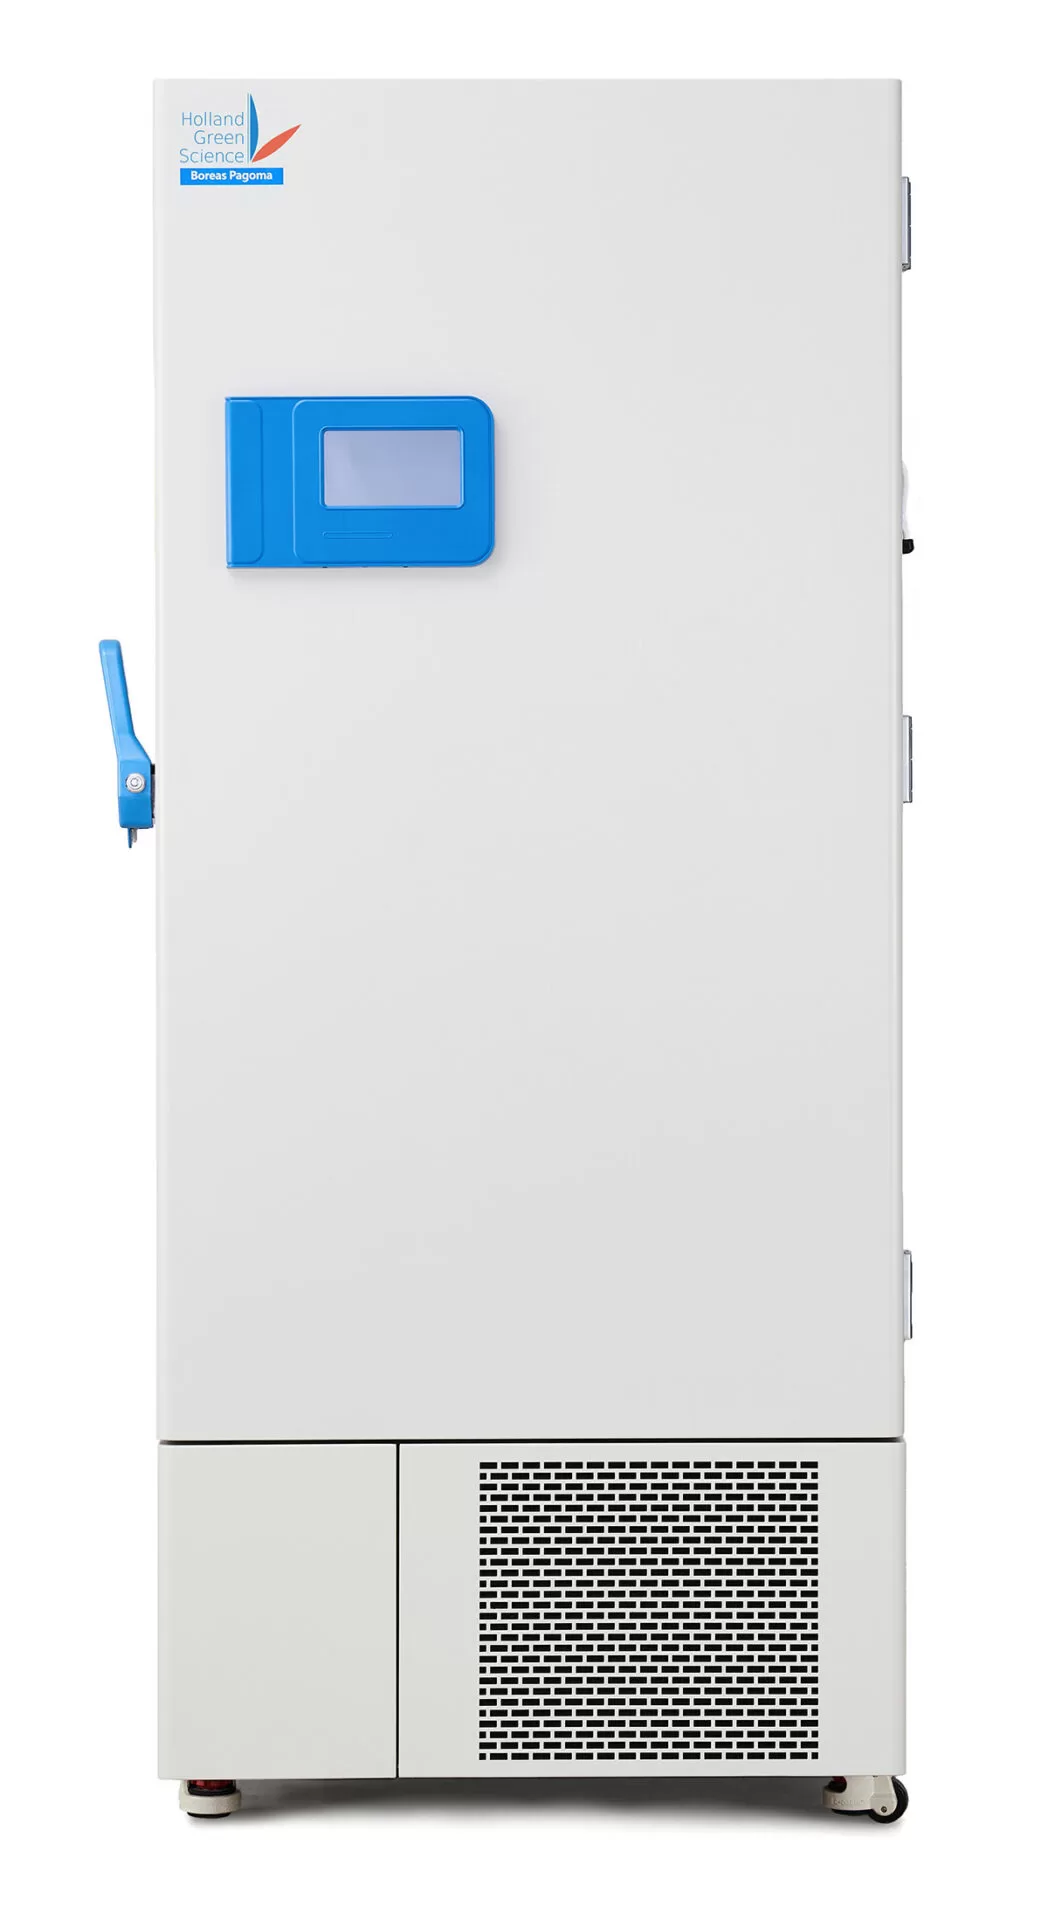 The Preseva Pergoma -86º (Ultra Low Temperature Freezer), with a Nominal Capacity of 322 liters (13.77 cu ft), offers a perfect solution for vaccine storage.